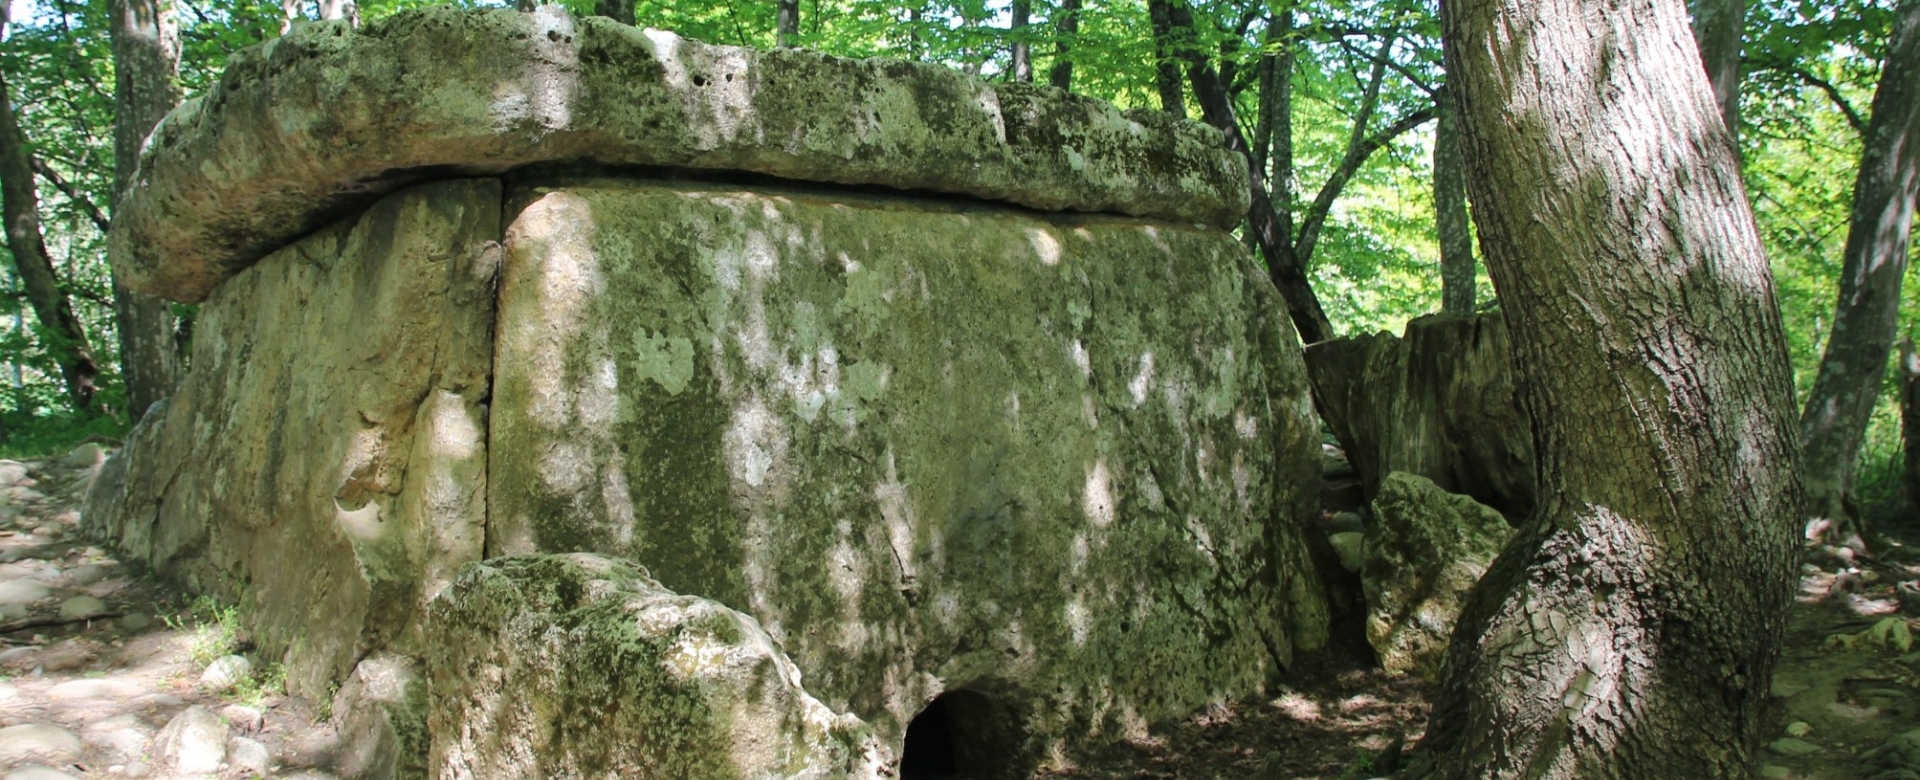 Dolmens stones what is it?